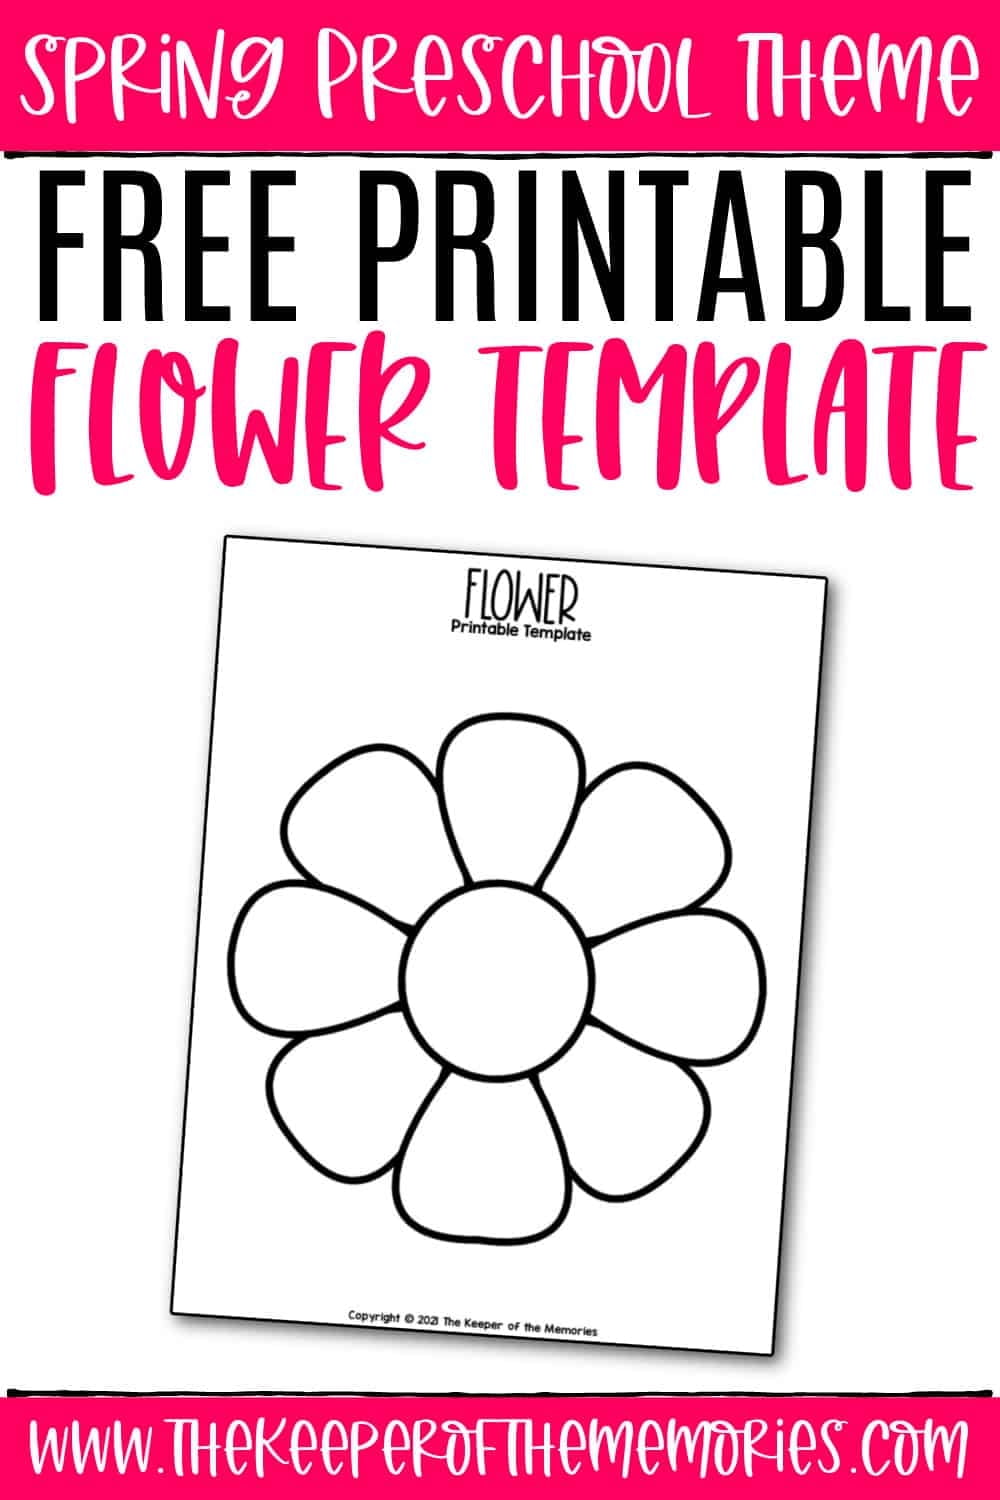 Free Printable Flower Template The Keeper Of The Memories